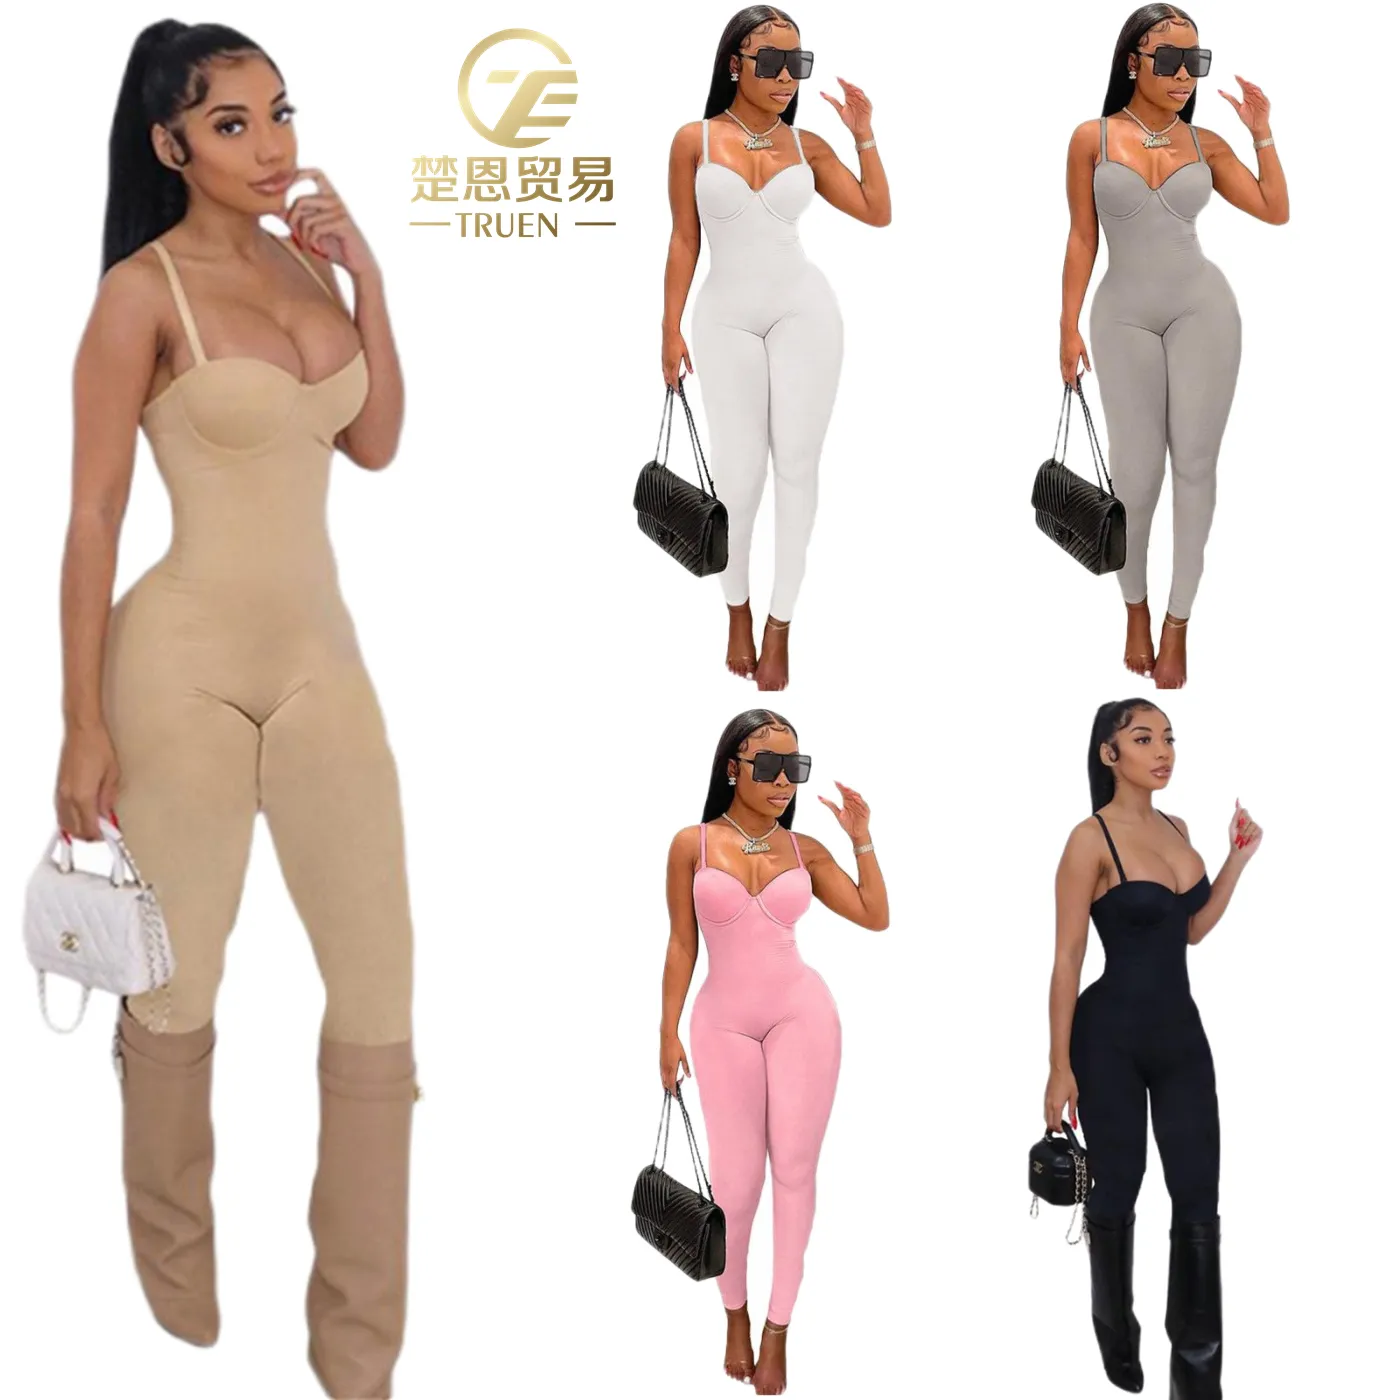 2022 Lady Clothing Summer stretch one piece rompers jumpsuit women party strap bra 3 in 1 sleeveless sexy bodysuit for women